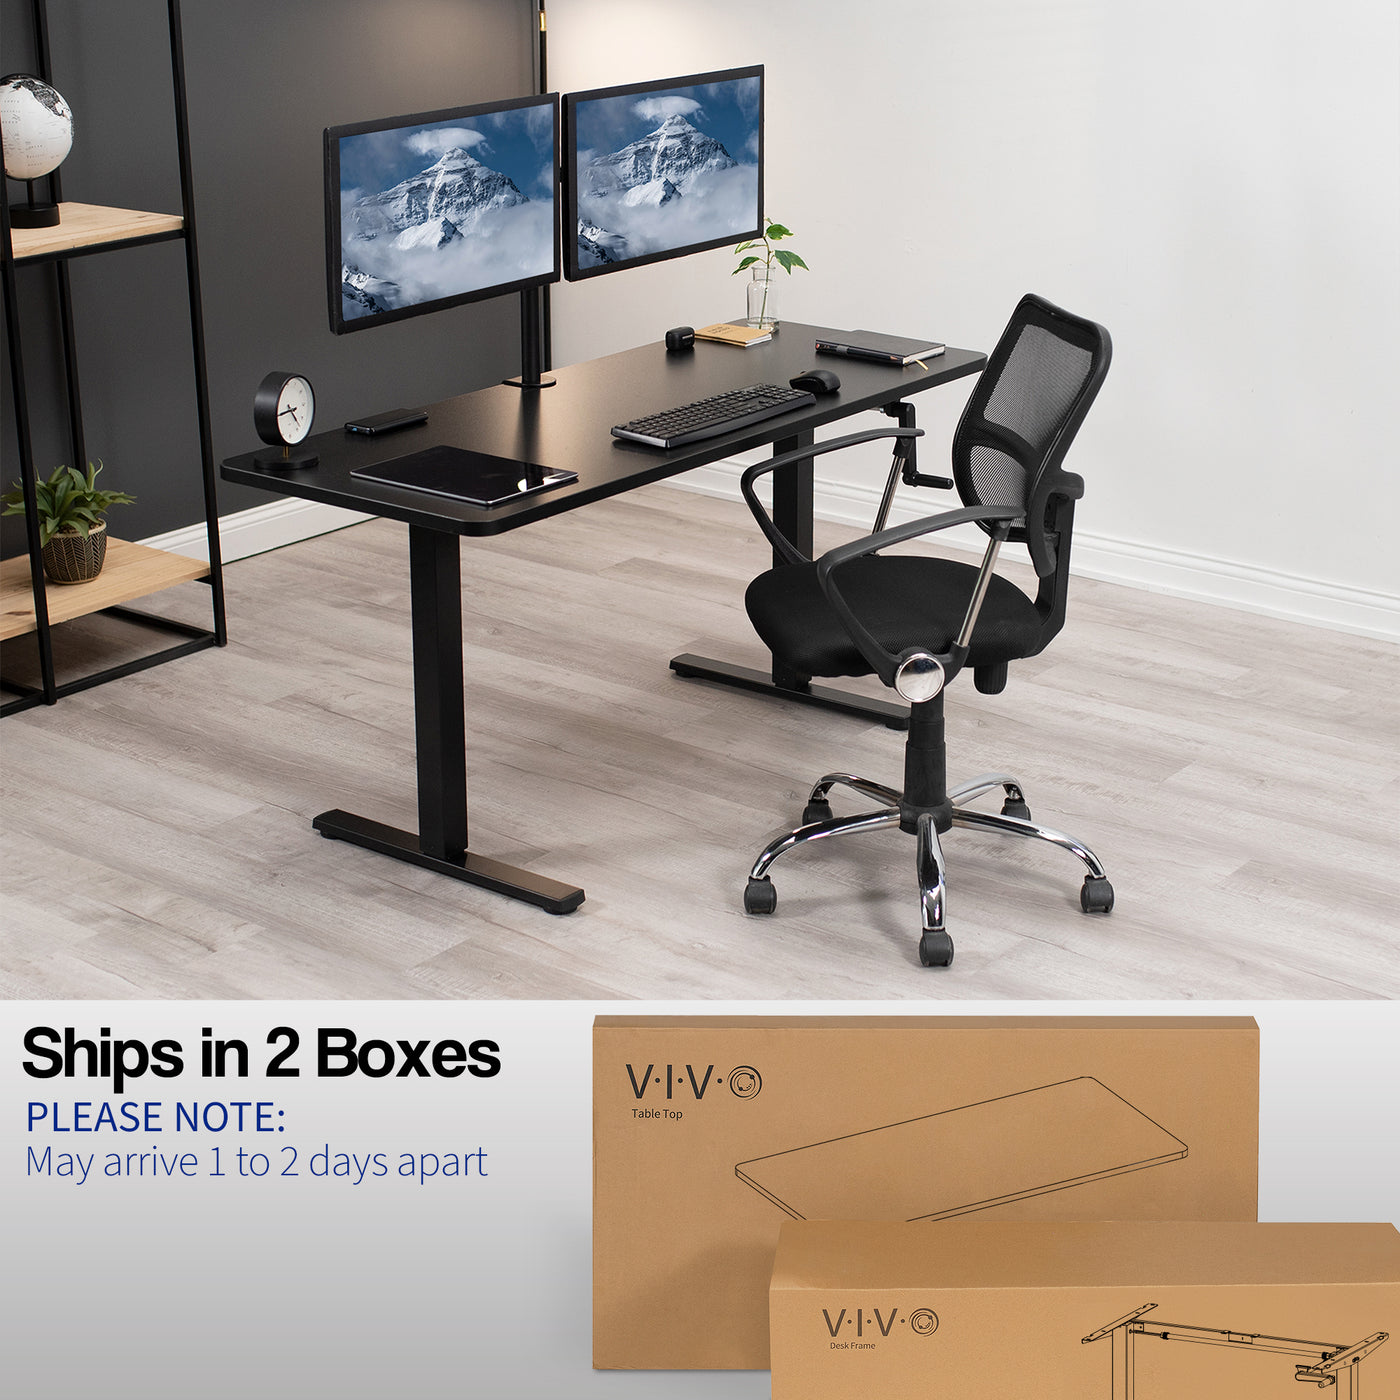 Please note that this desk ships in two boxes and may be delivered separately.